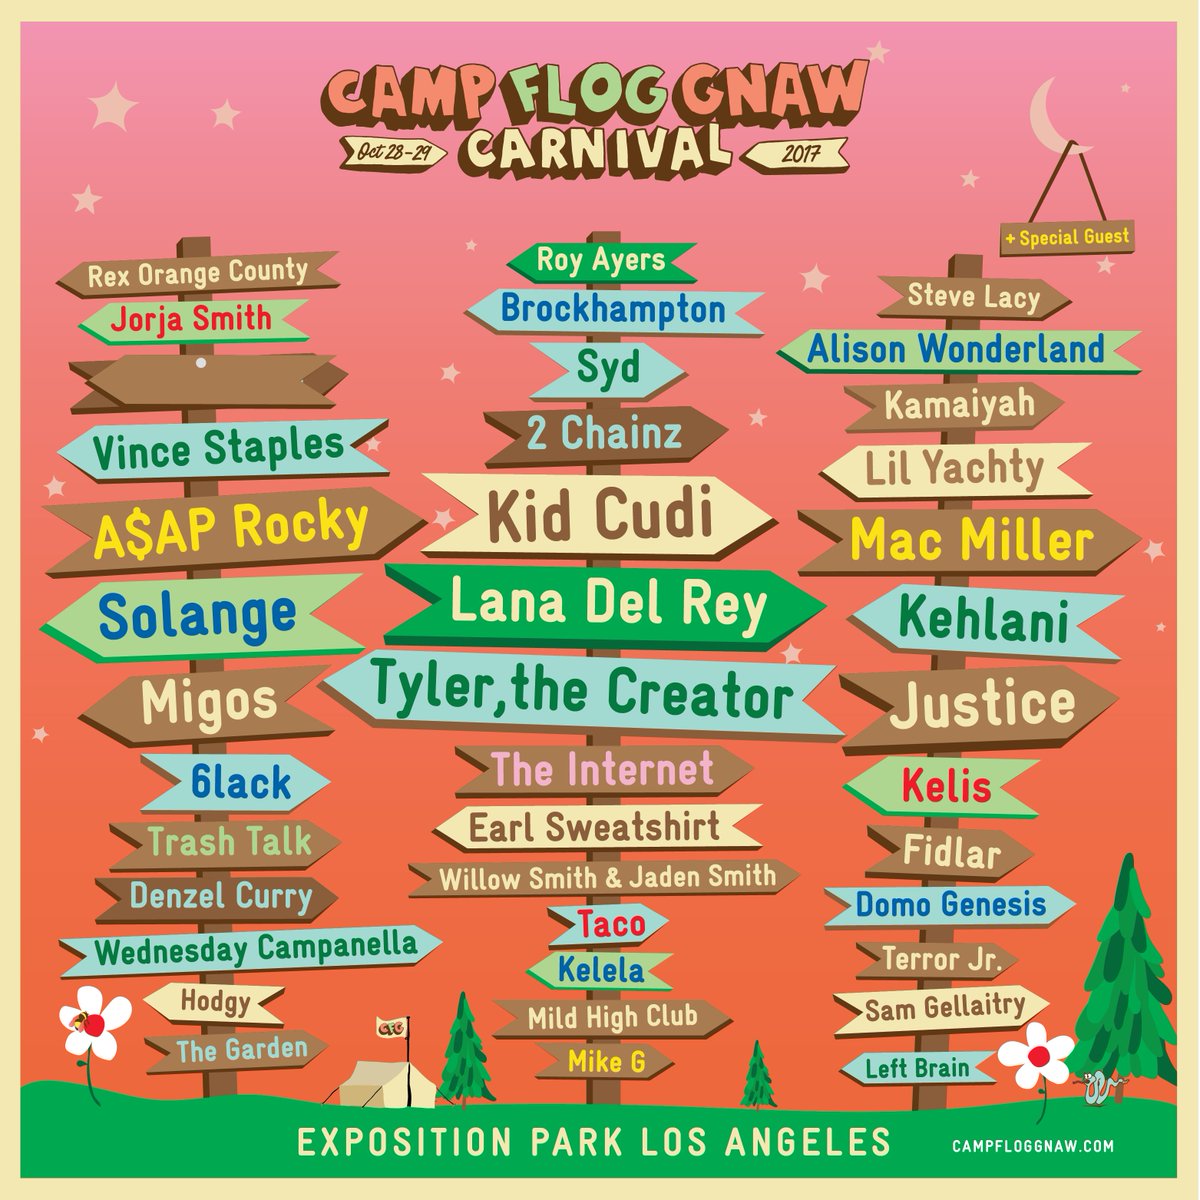 RT @tylerthecreator: CAMP FLOG GNAW 2017. TICKETS ON SALE THURSDAY. NOON. 12PST https://t.co/qr1p1DWg4g